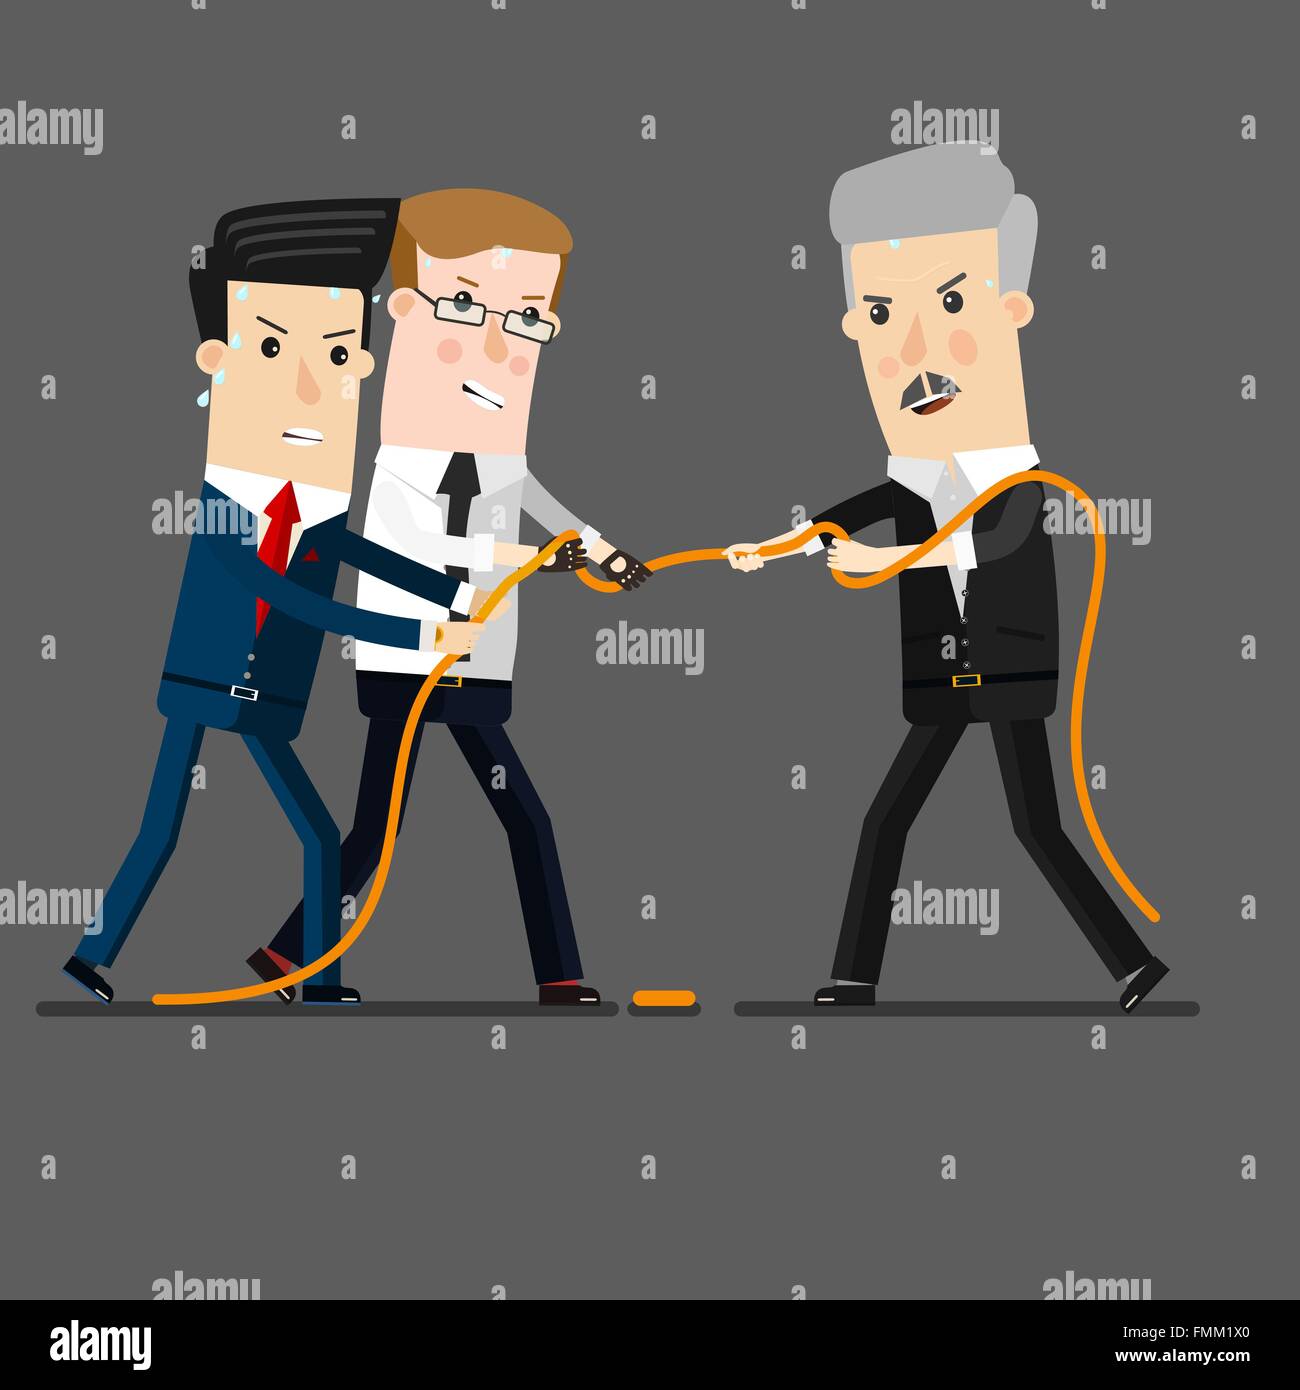 Successful and powerful businessman competing with group businessmen in a tug of war battle, for leadership or business competition.  Business concept cartoon illustration Stock Vector